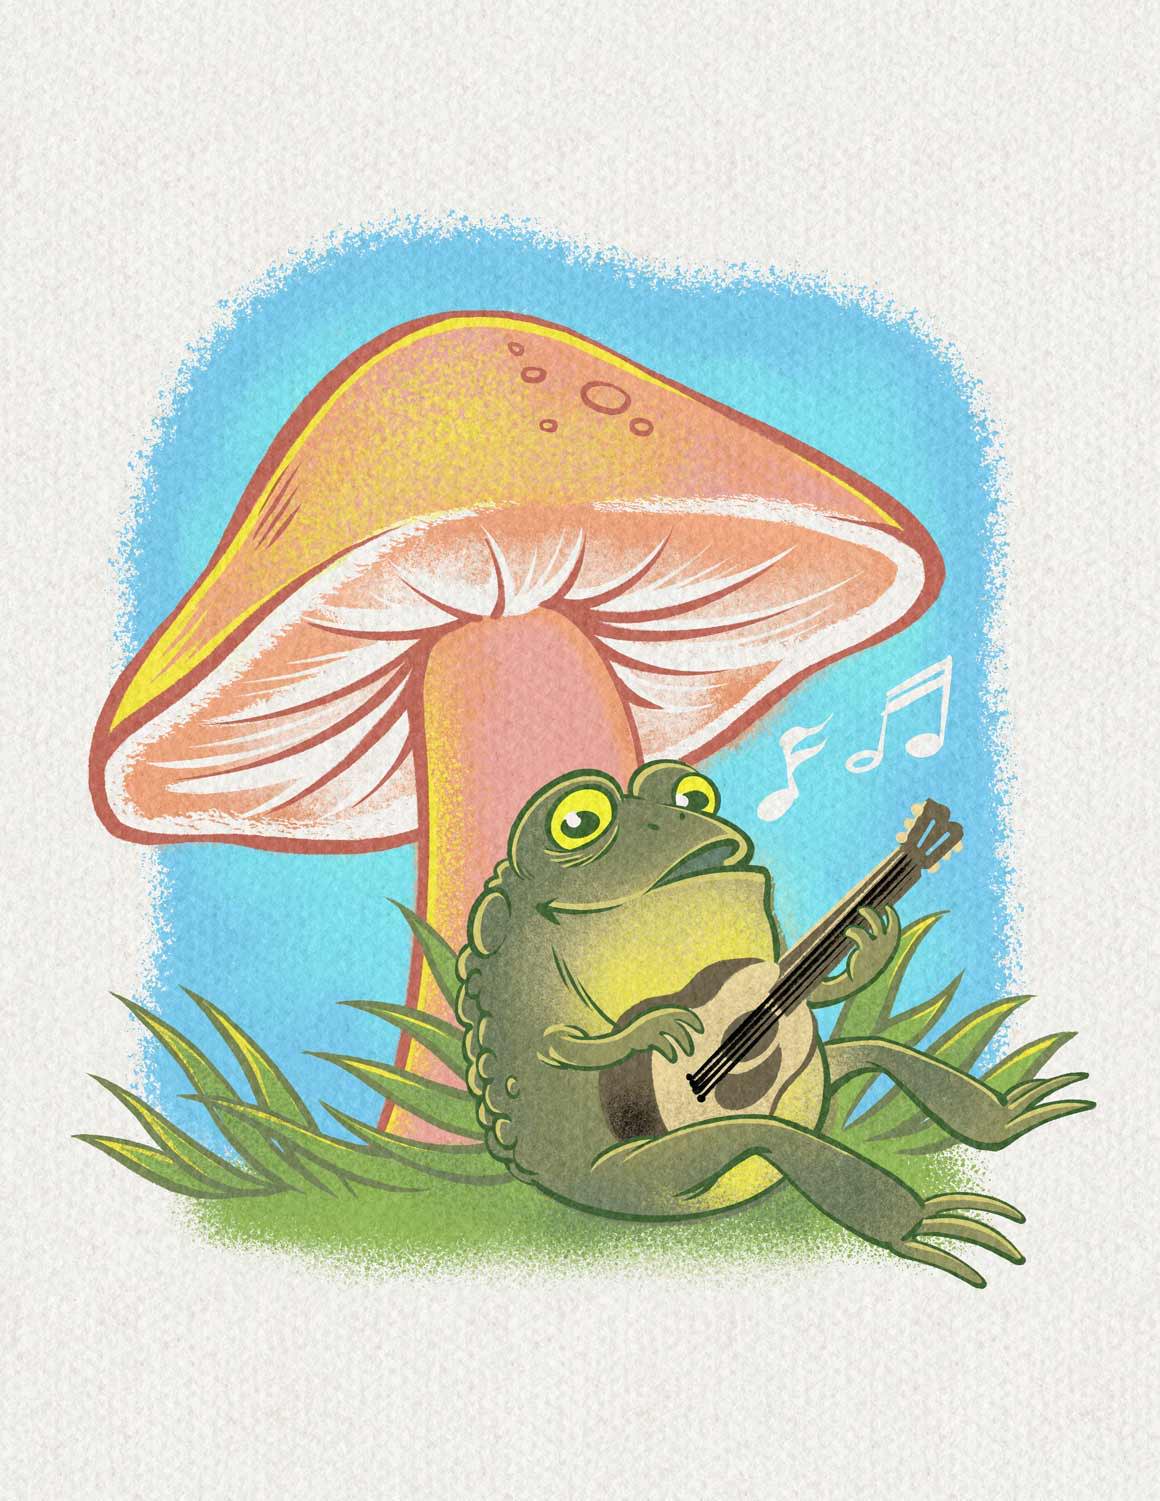 Digital illustration of a toad playing guitar under a toadstool modeled after a gouache painting.